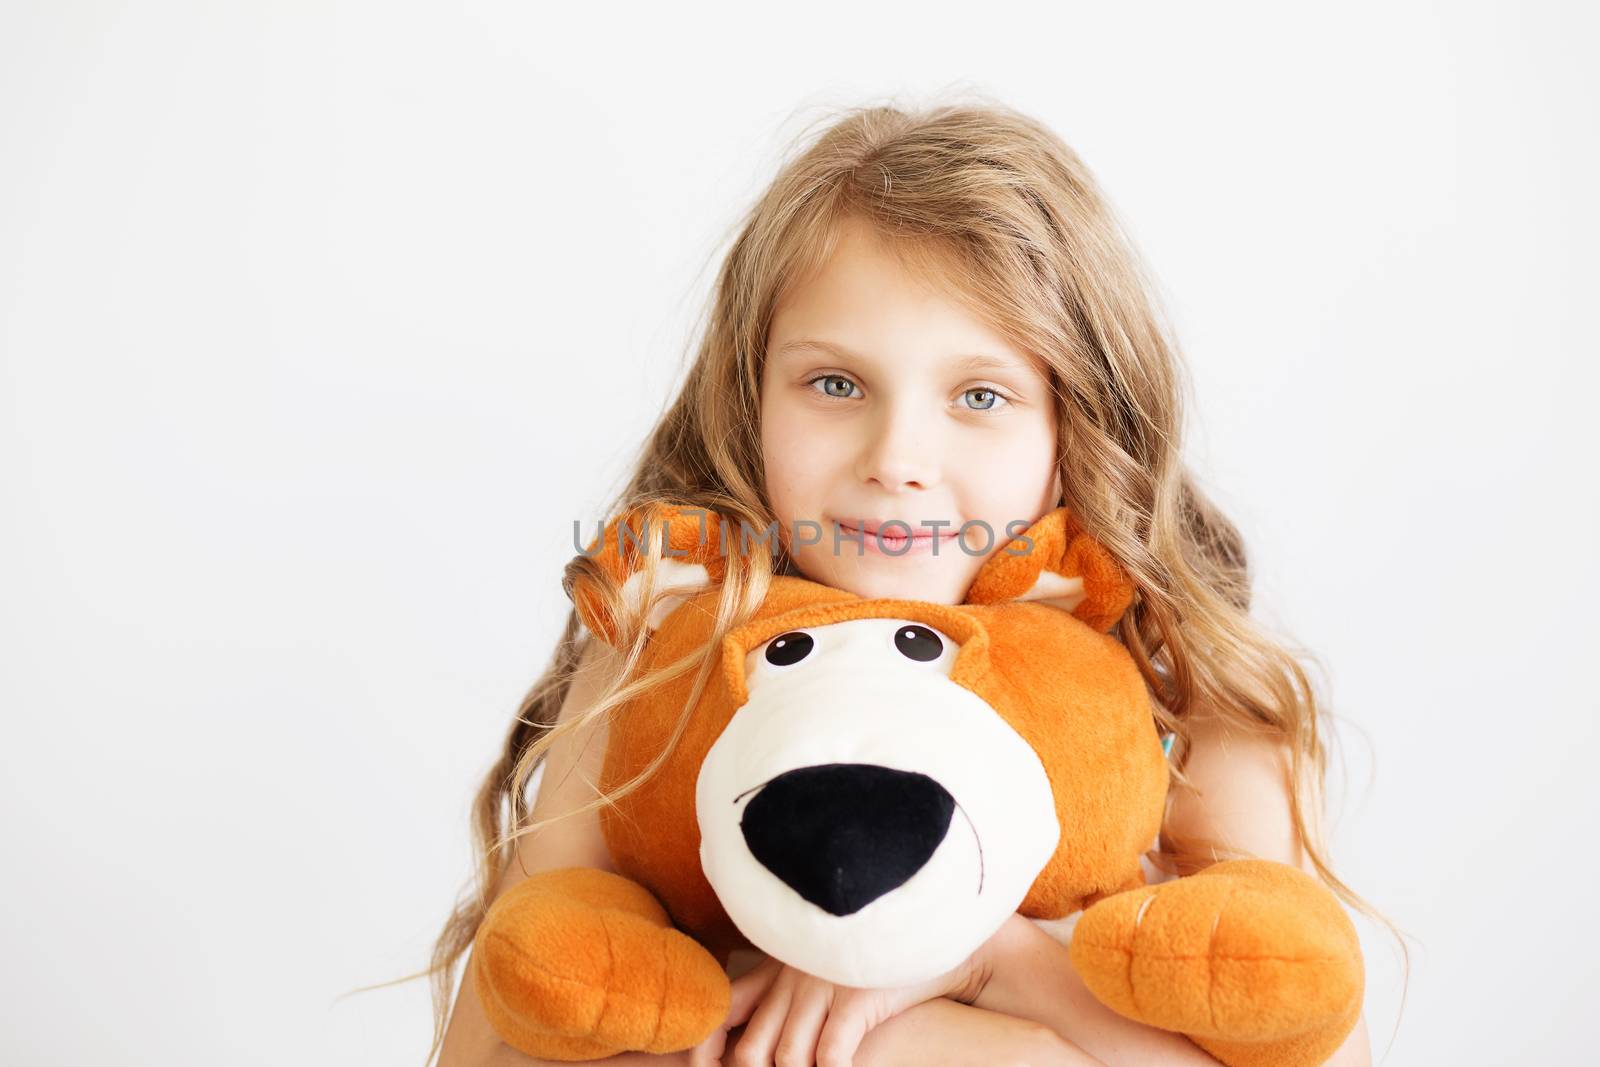 Little girl with big teddy bear having fun laughing Isolated on white background